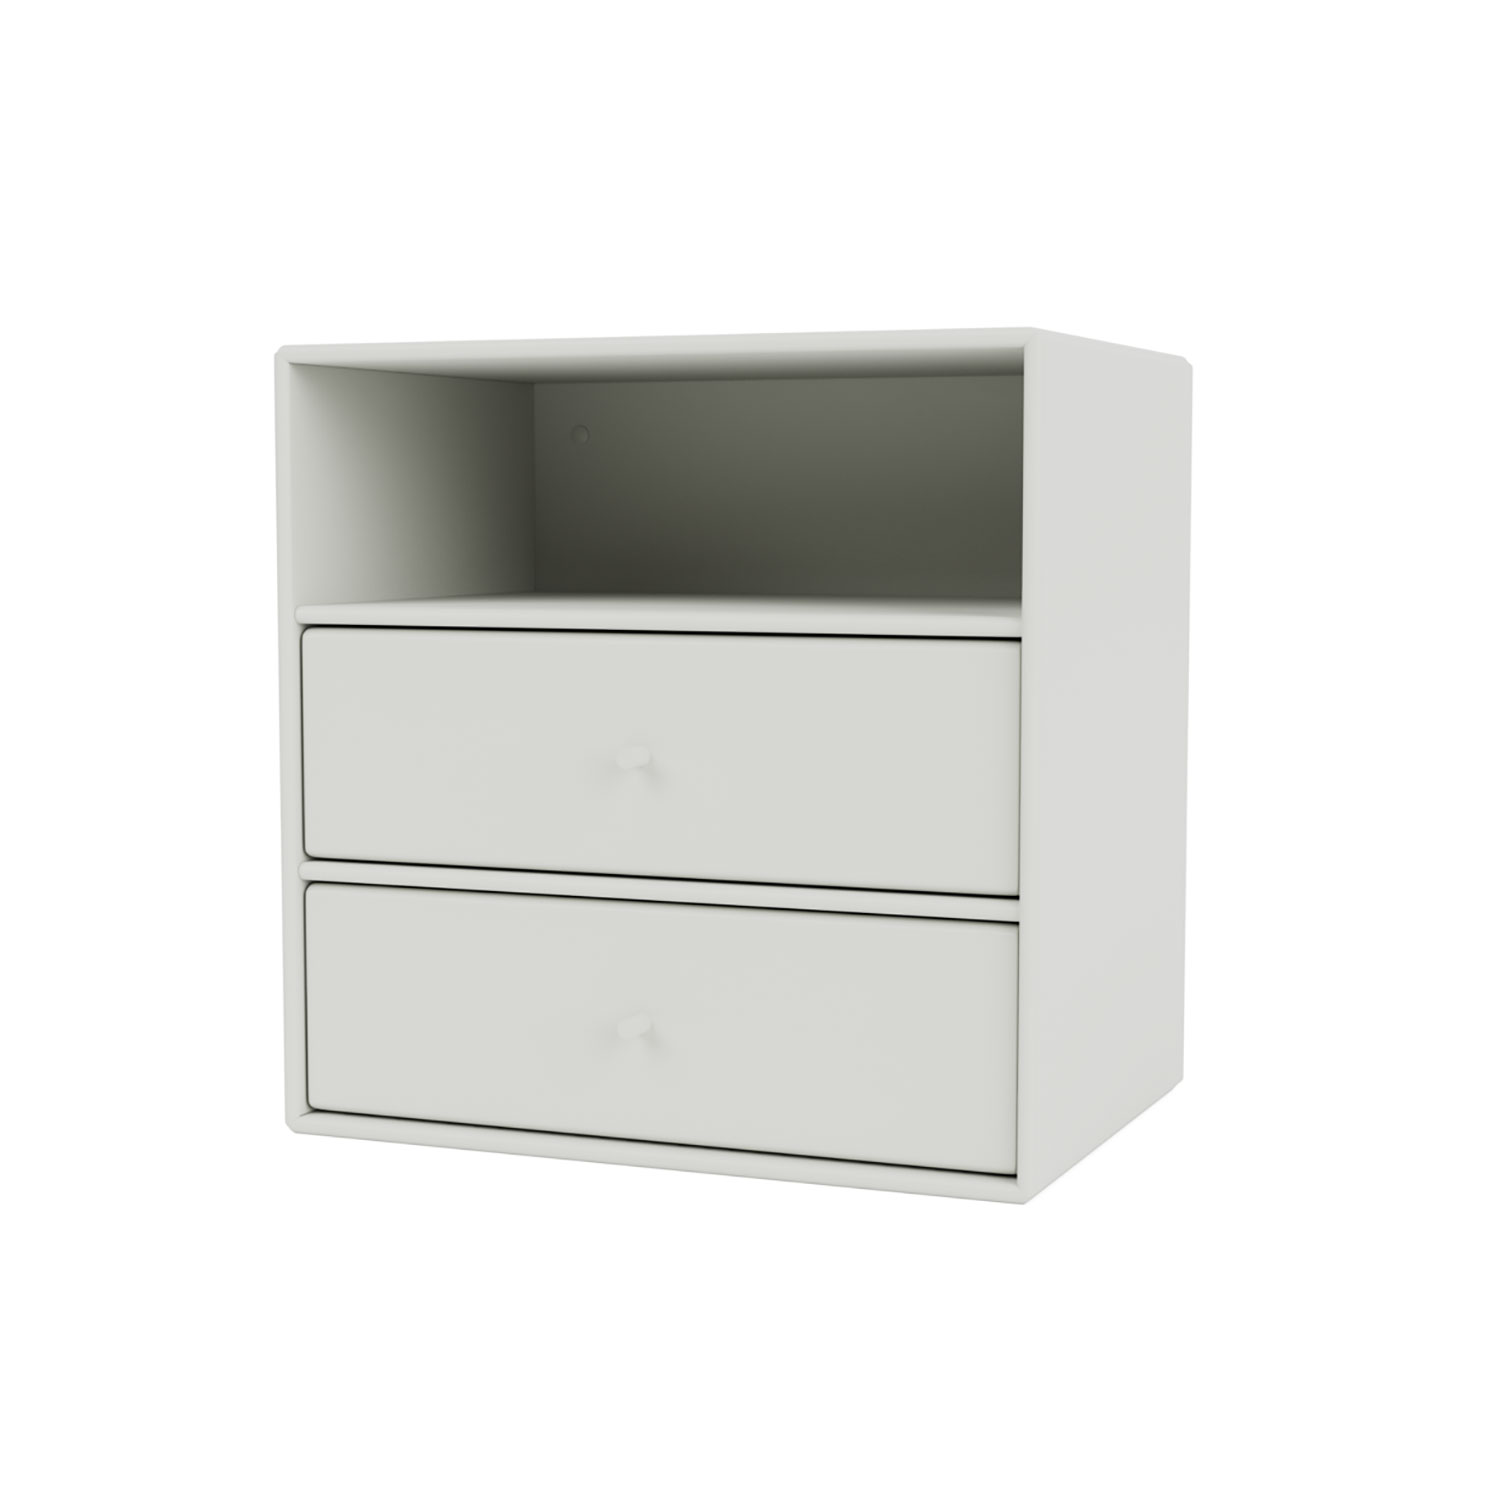 Mini 1006 with two drawers, 10colors